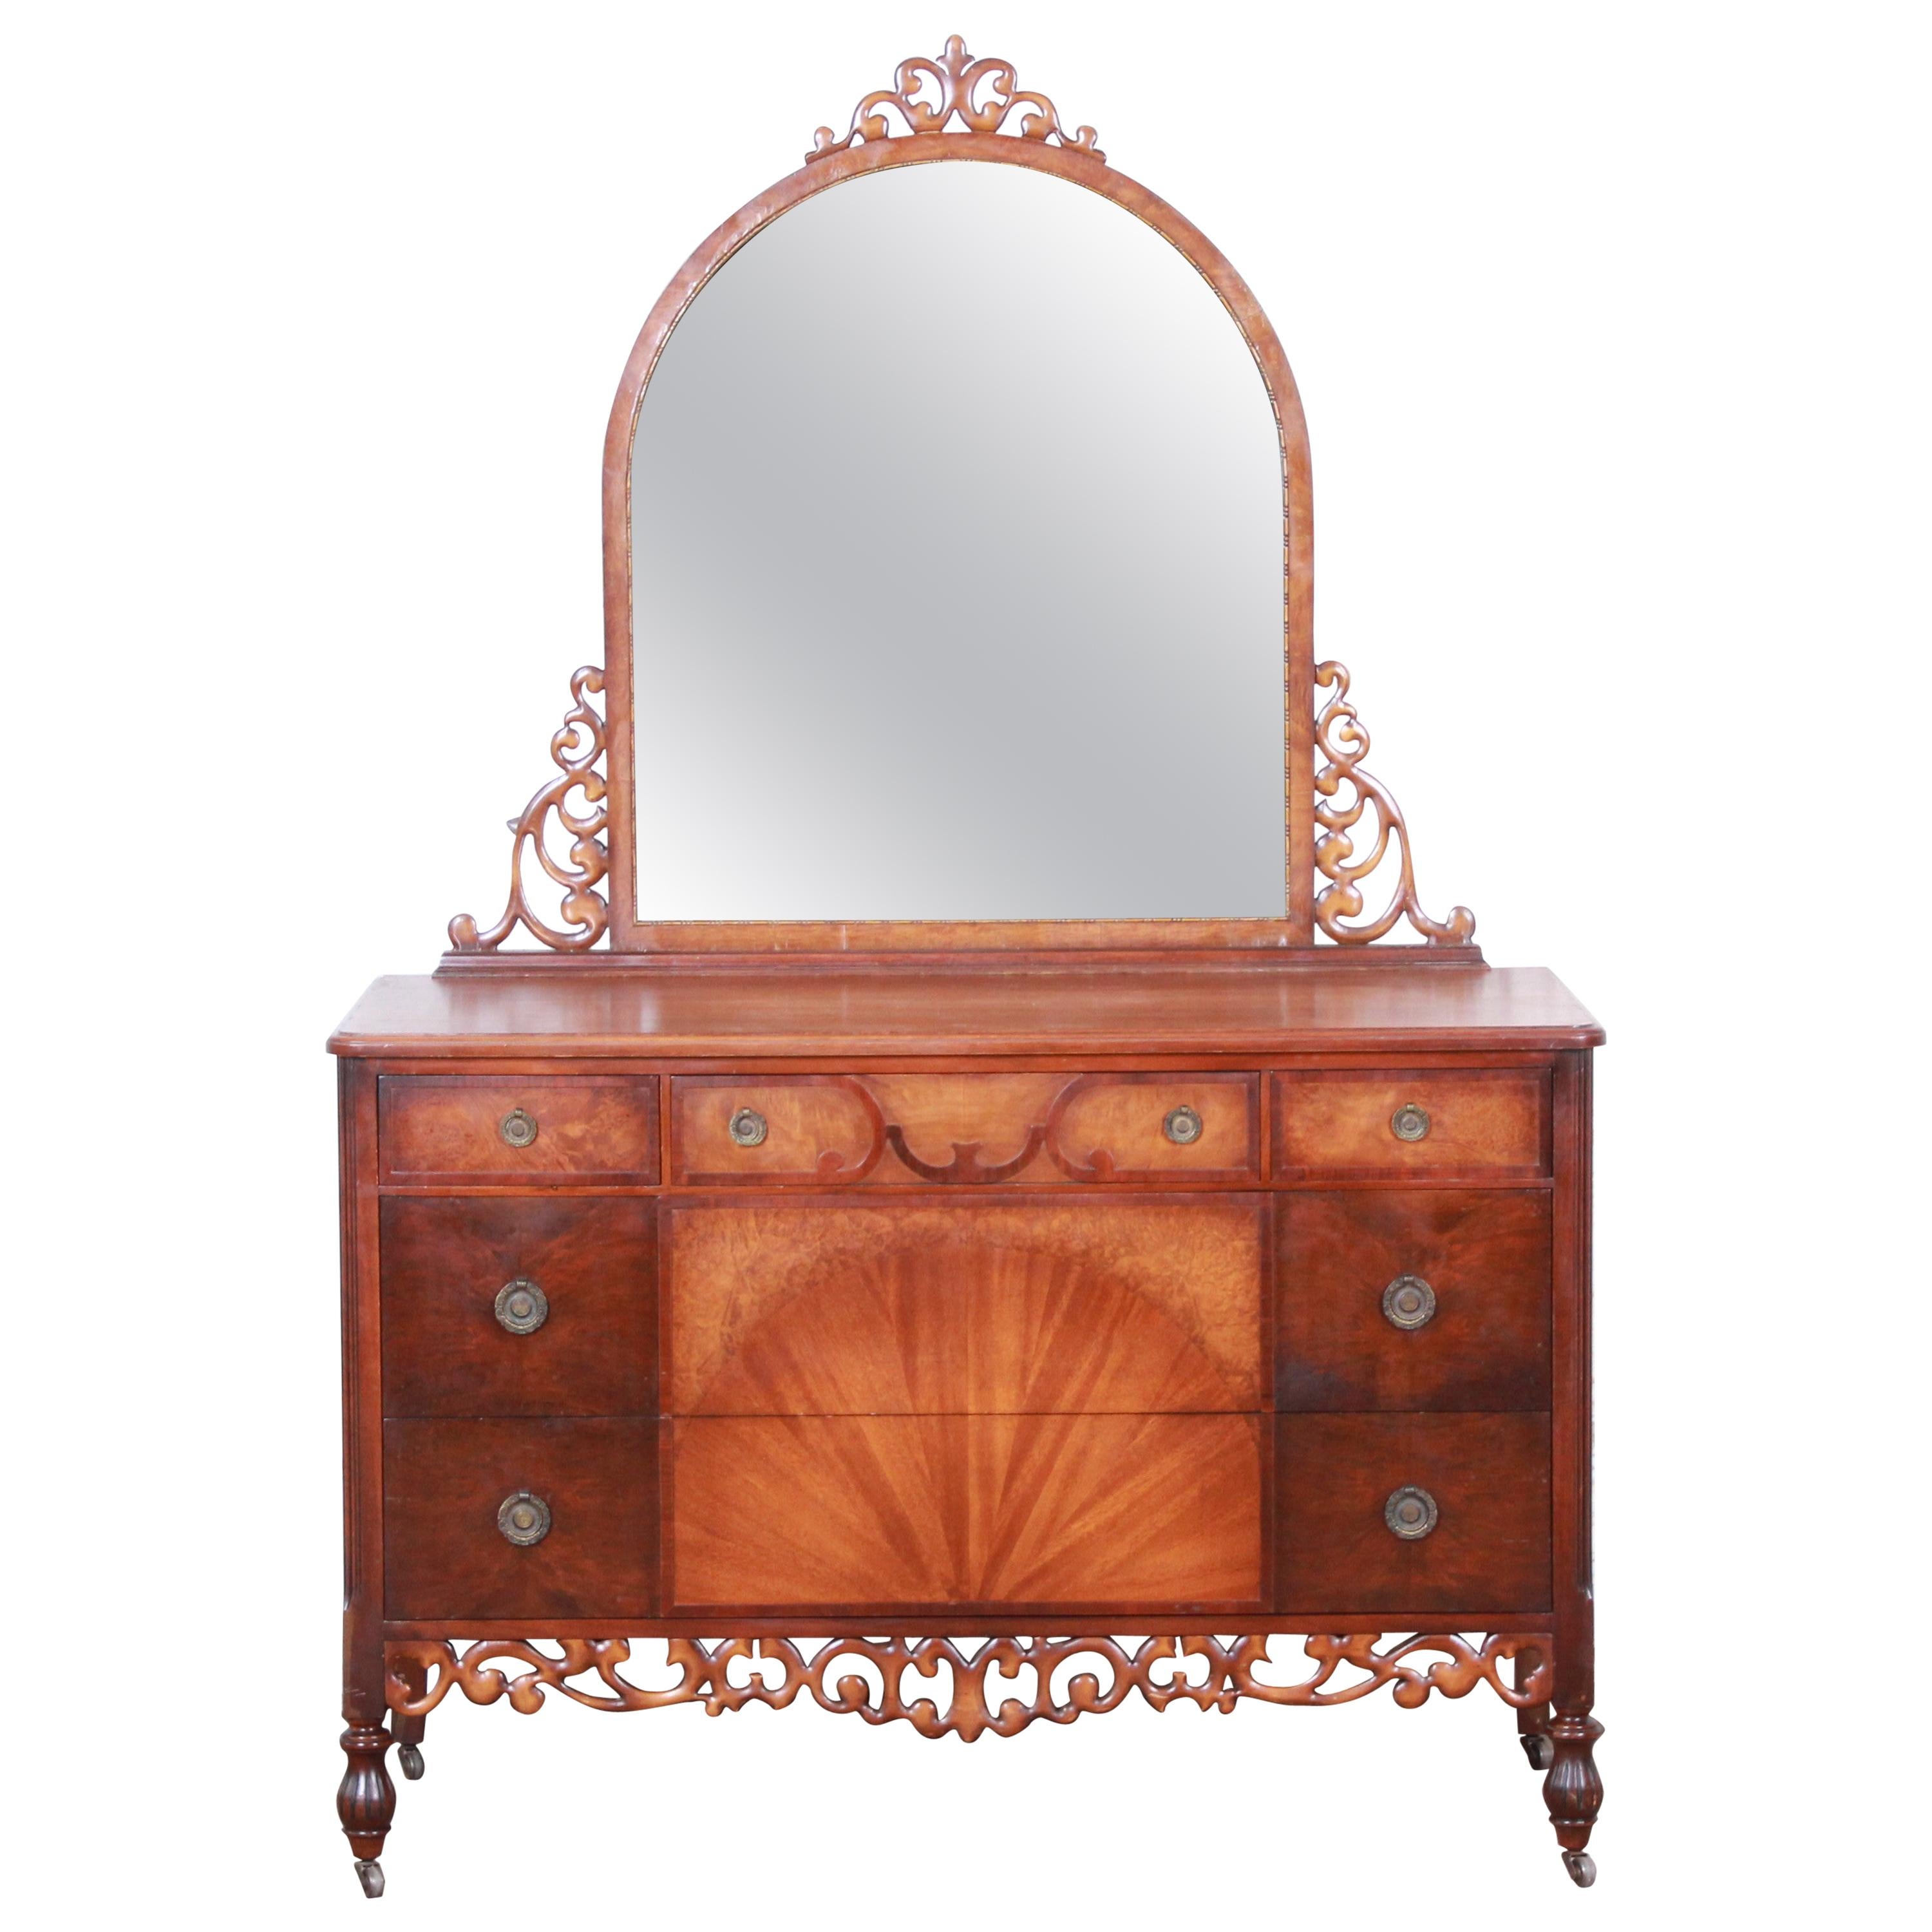 Early Herman Miller Ornate Walnut and Burl Wood Dresser with Mirror, circa 1920s